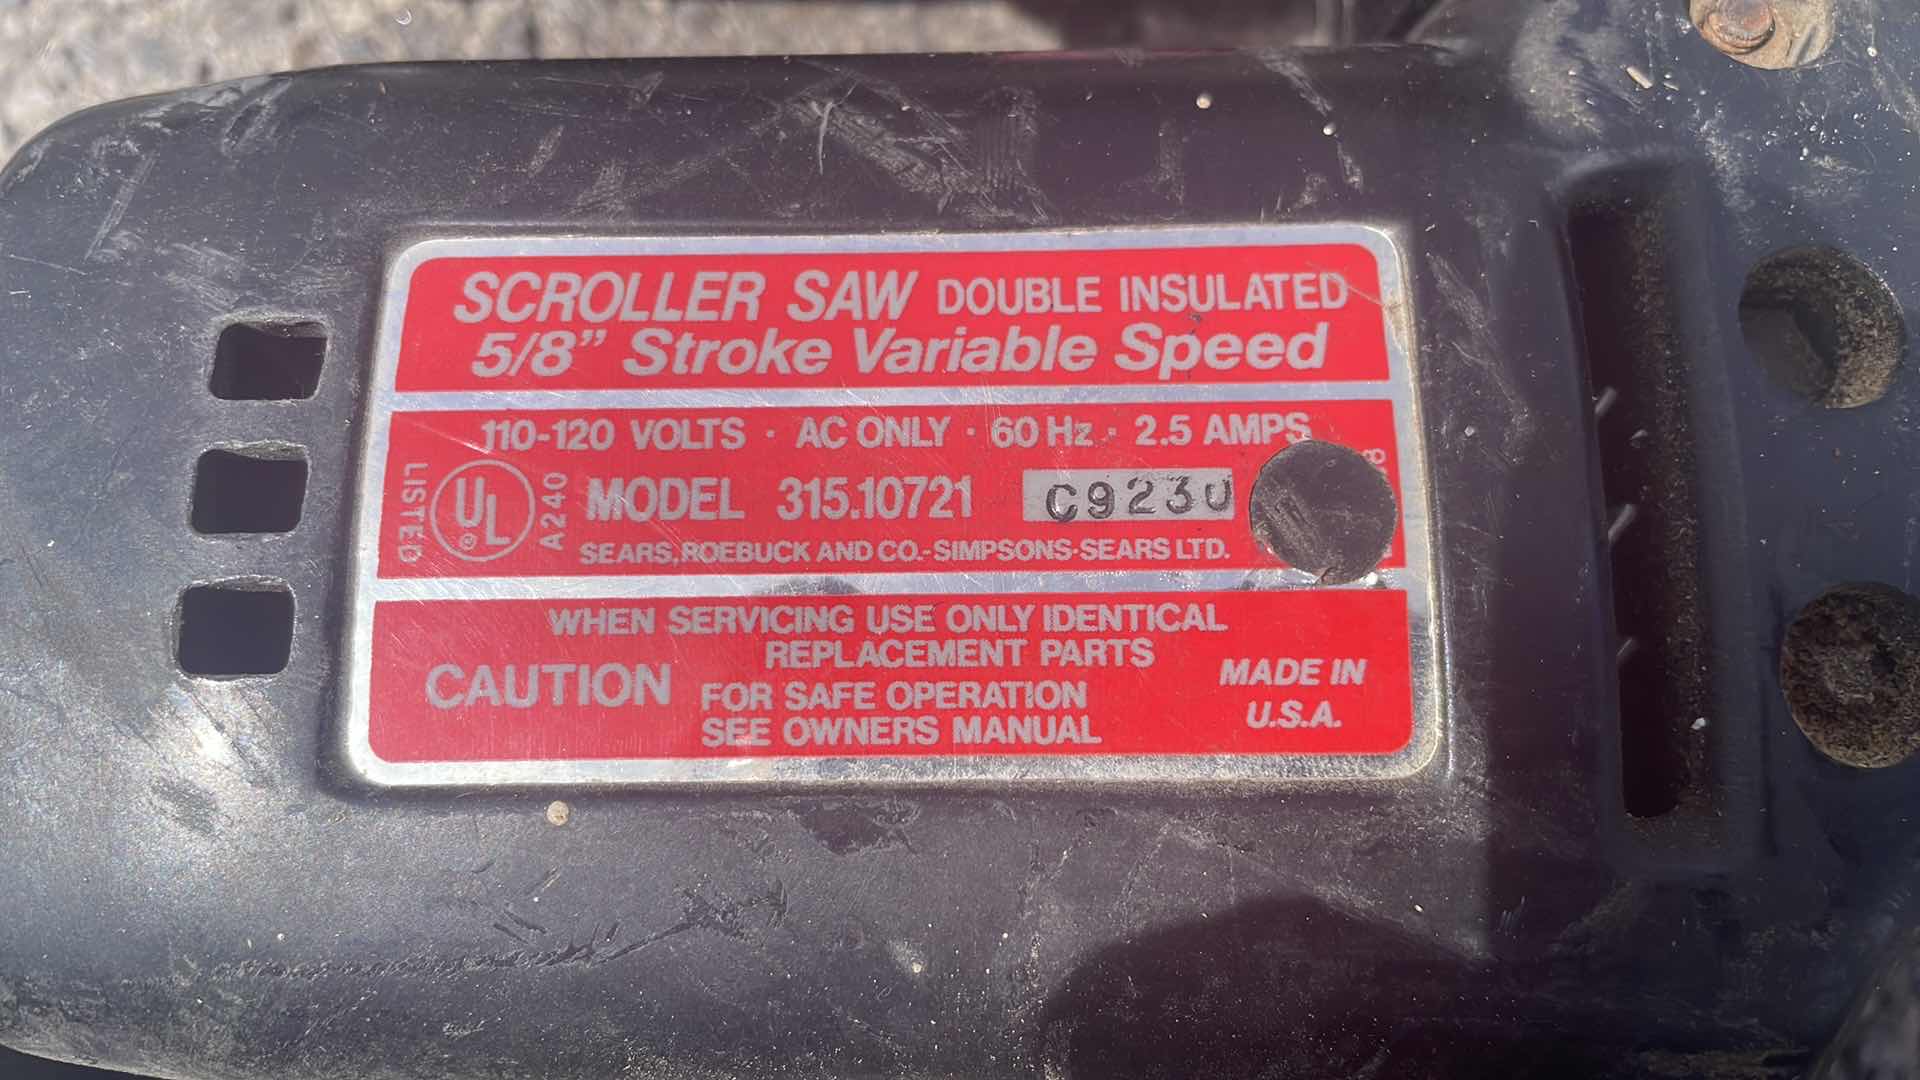 Photo 2 of CRAFTSMAN SCROLLER SAW 5/8” VARIABLE SPEED